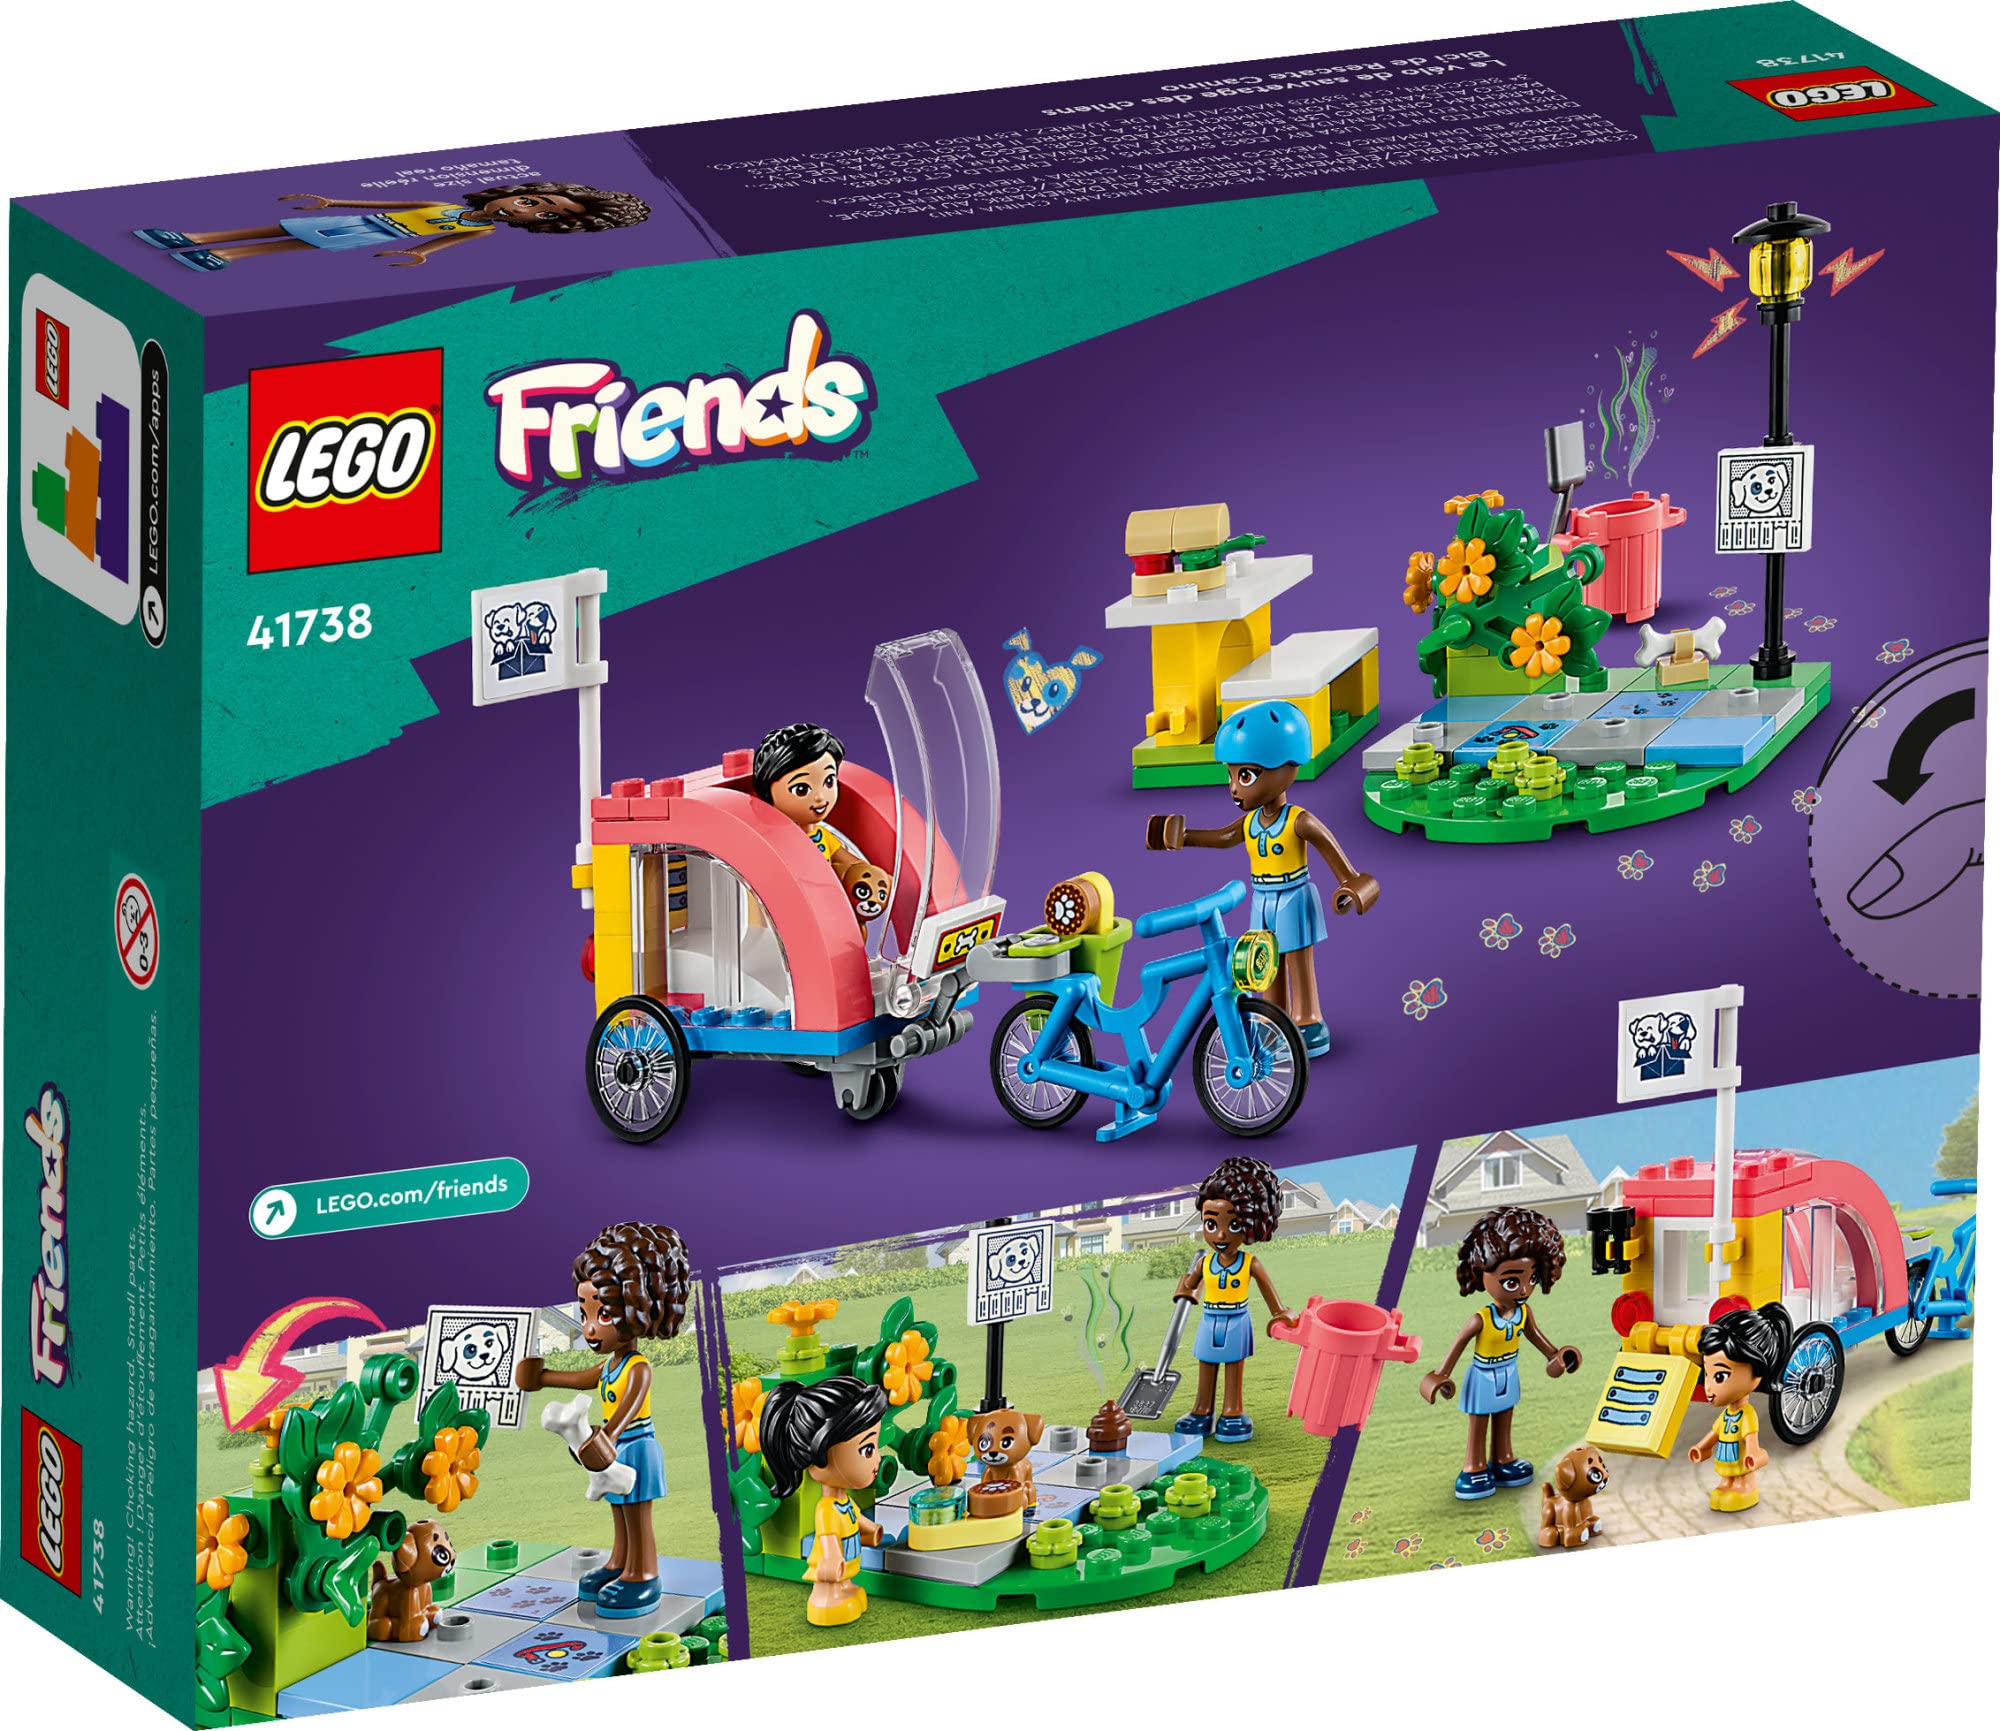 LEGO Friends Dog Rescue Bike Building Set 41738, Pretend Play Animal Playset for Pet-Loving Kids, Girls and Boys Ages 6+ Years Old with Puppy Pet Figure and 2 Mini-Dolls, 2023 Series Characters